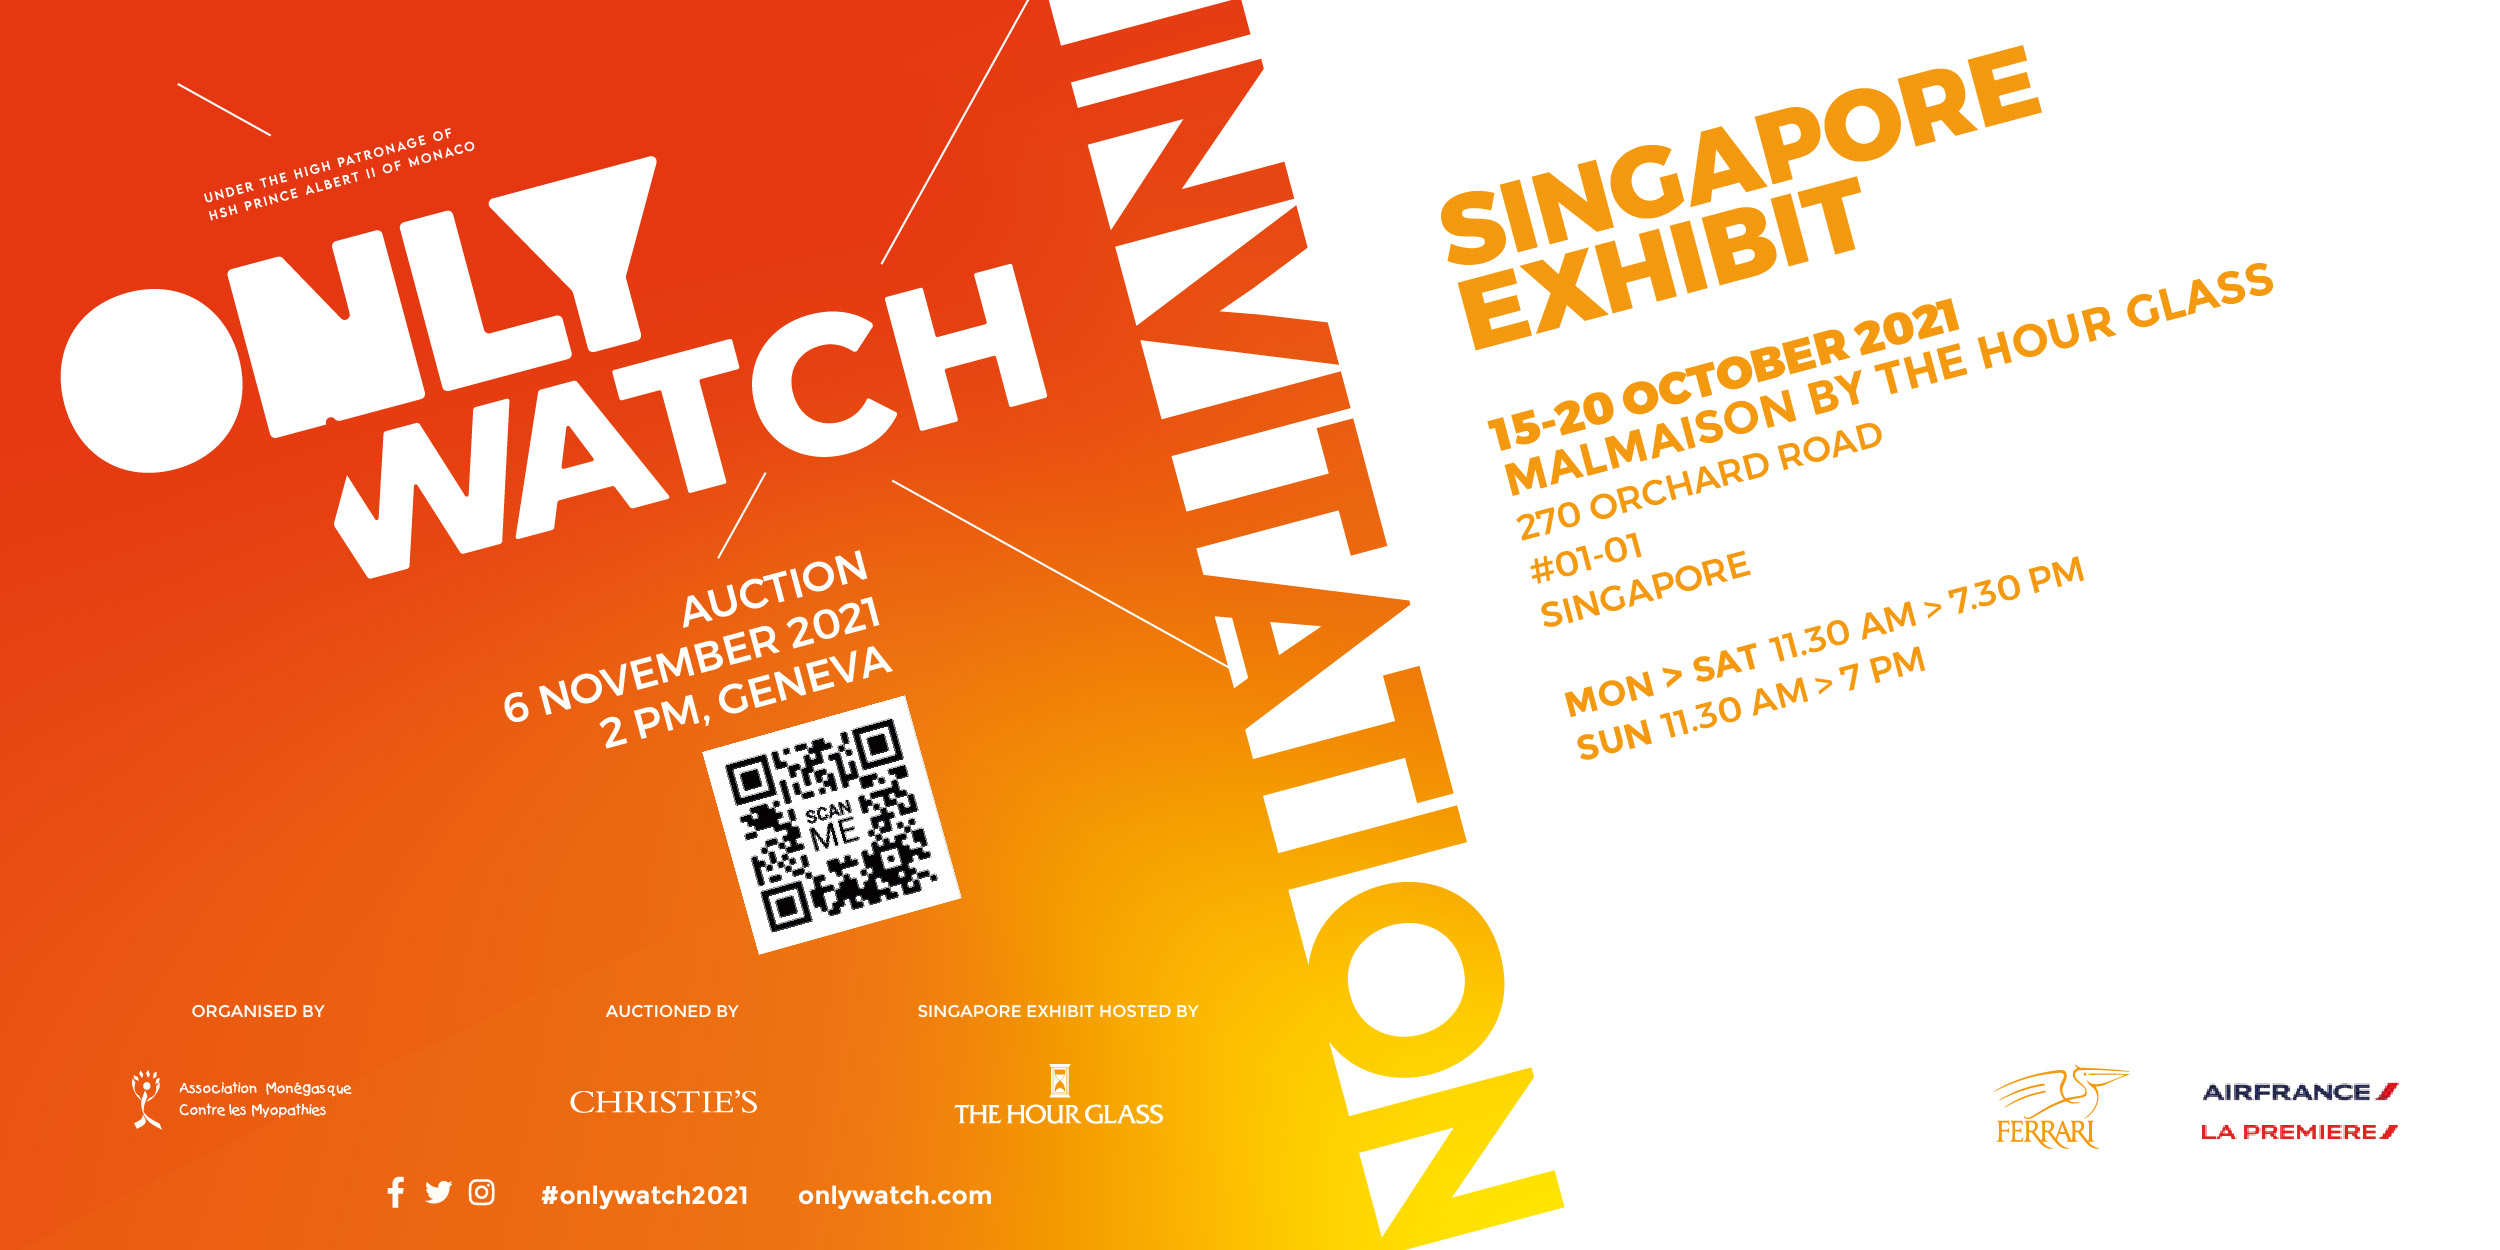 ONLY WATCH 2021 Exhibition E invitation The Hour Glass Singapore